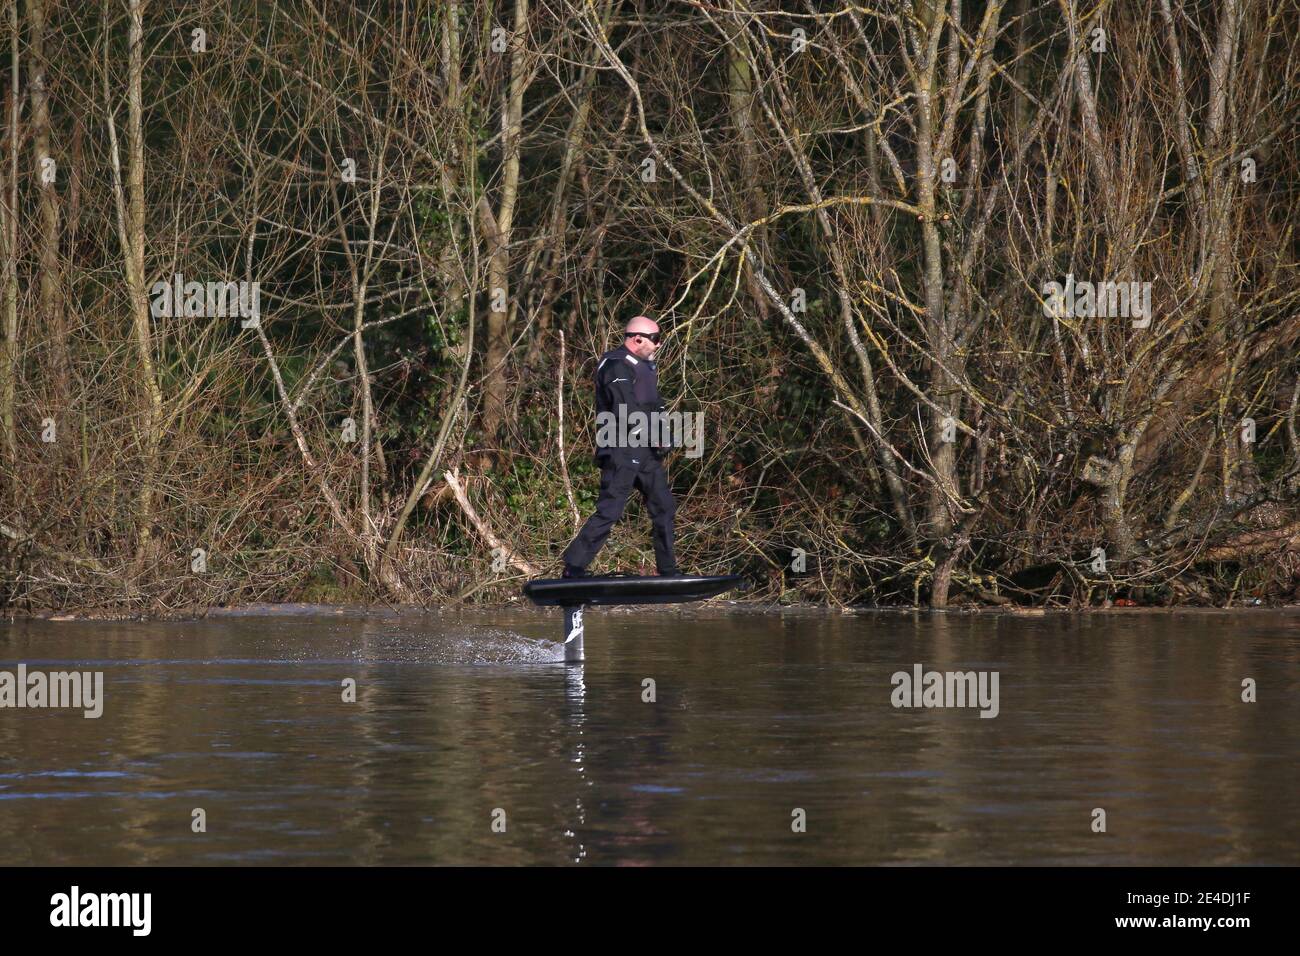 Man riding a personal hydrofoil (Lift eFoil), Sadlers Ride, Hurst Park, East Molesey, Surrey, England, Great Britain, United Kingdom, UK, Europe Stock Photo